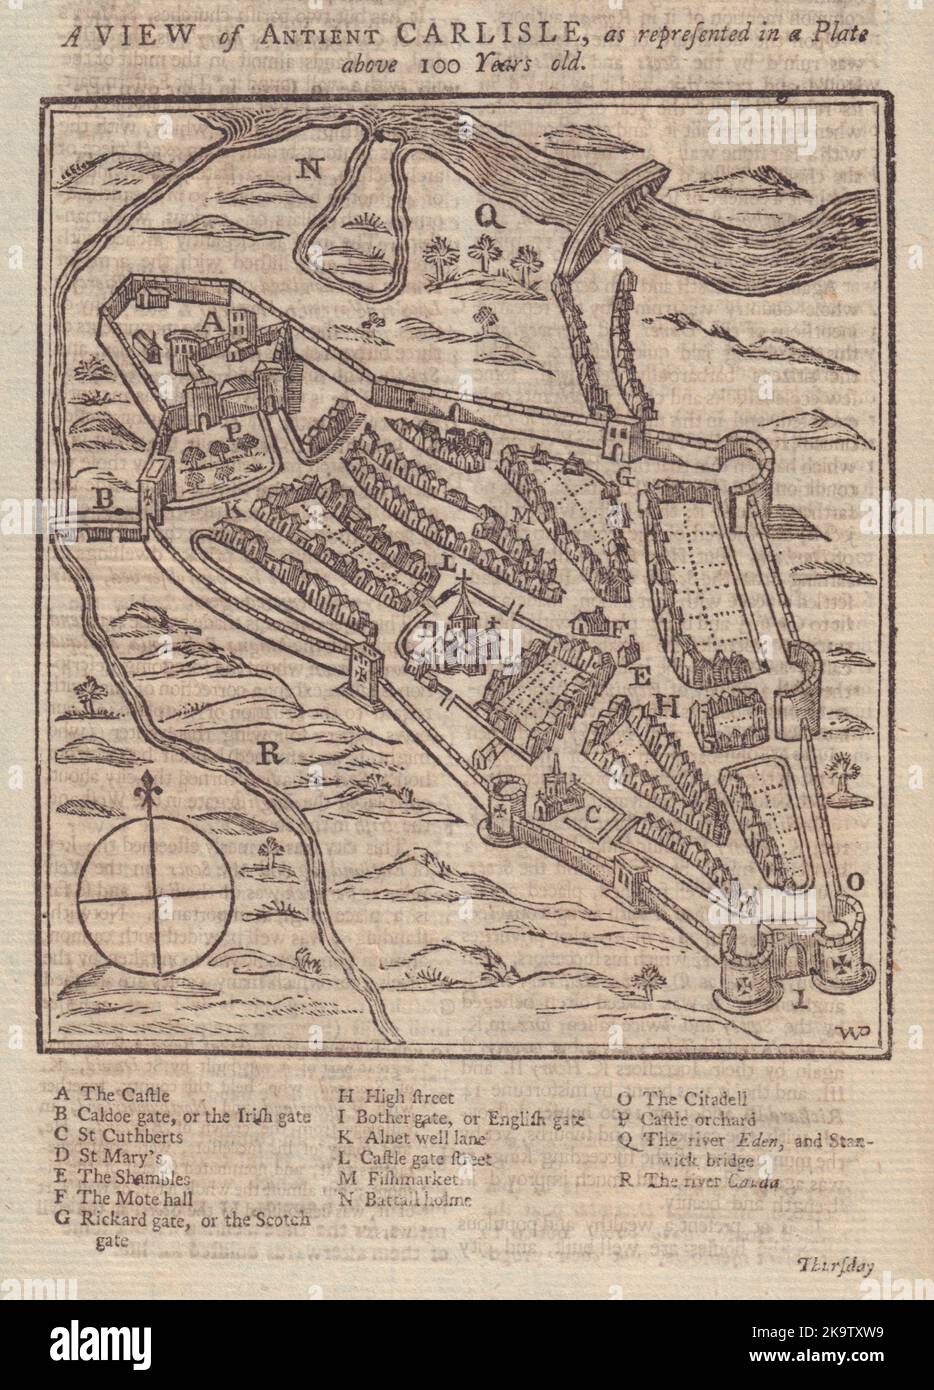 A View of Antient Carlisle. Town/city plan. Cumbria. GENTS MAG 1745 old map Stock Photo